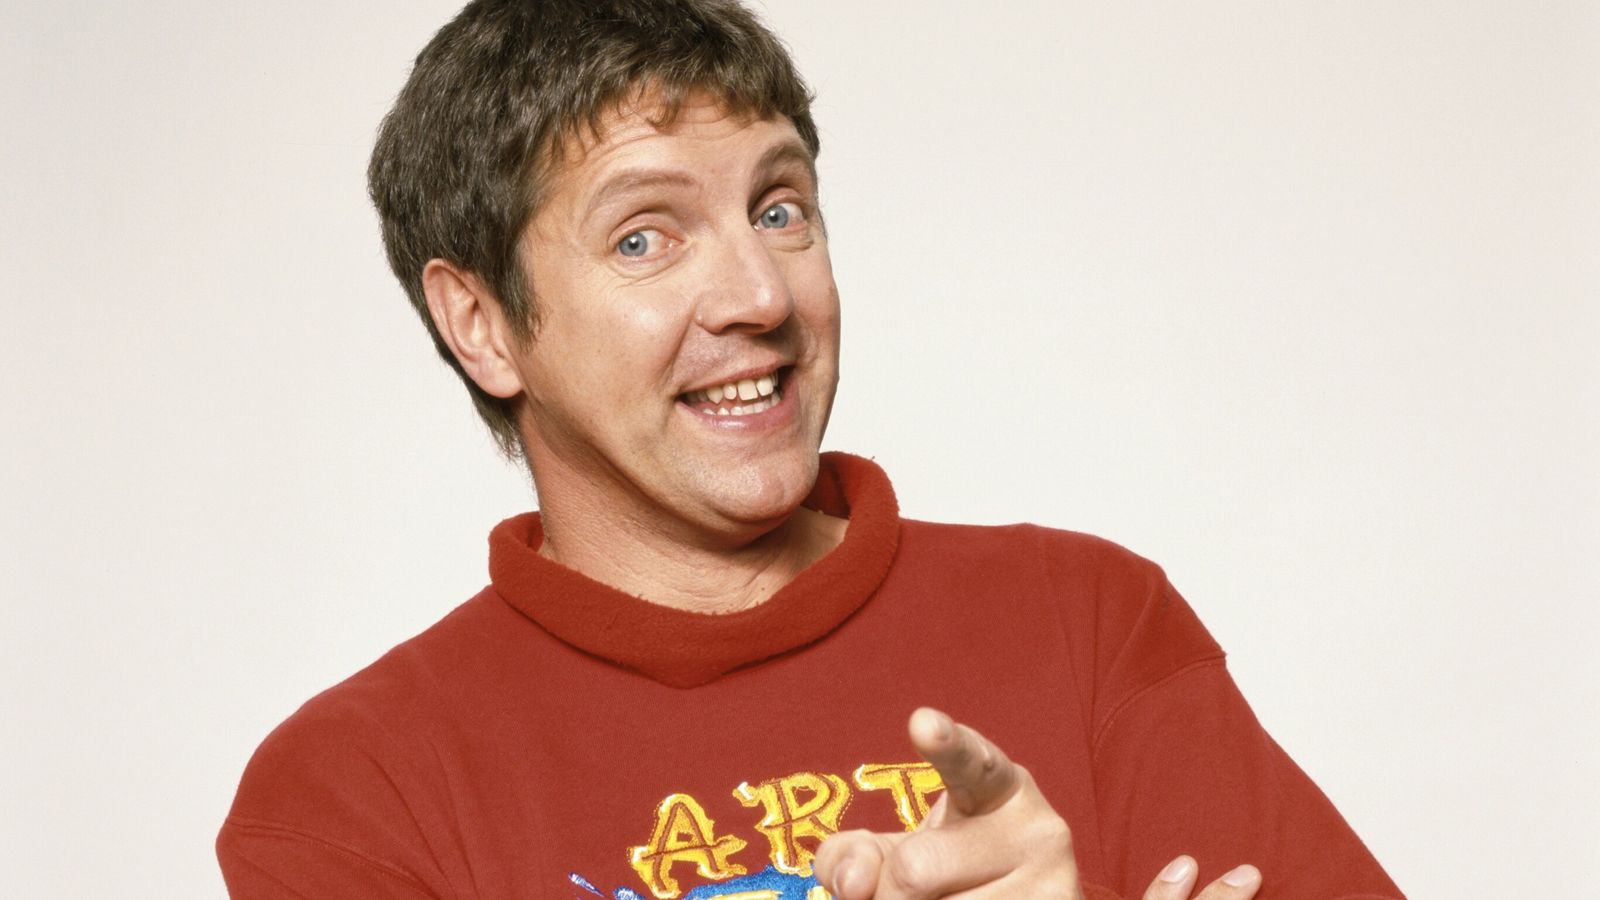 Art Attack’s Neil Buchanan is forced to deny he is Banksy after being “overwhelmed” by inquiries  Ents & Arts News